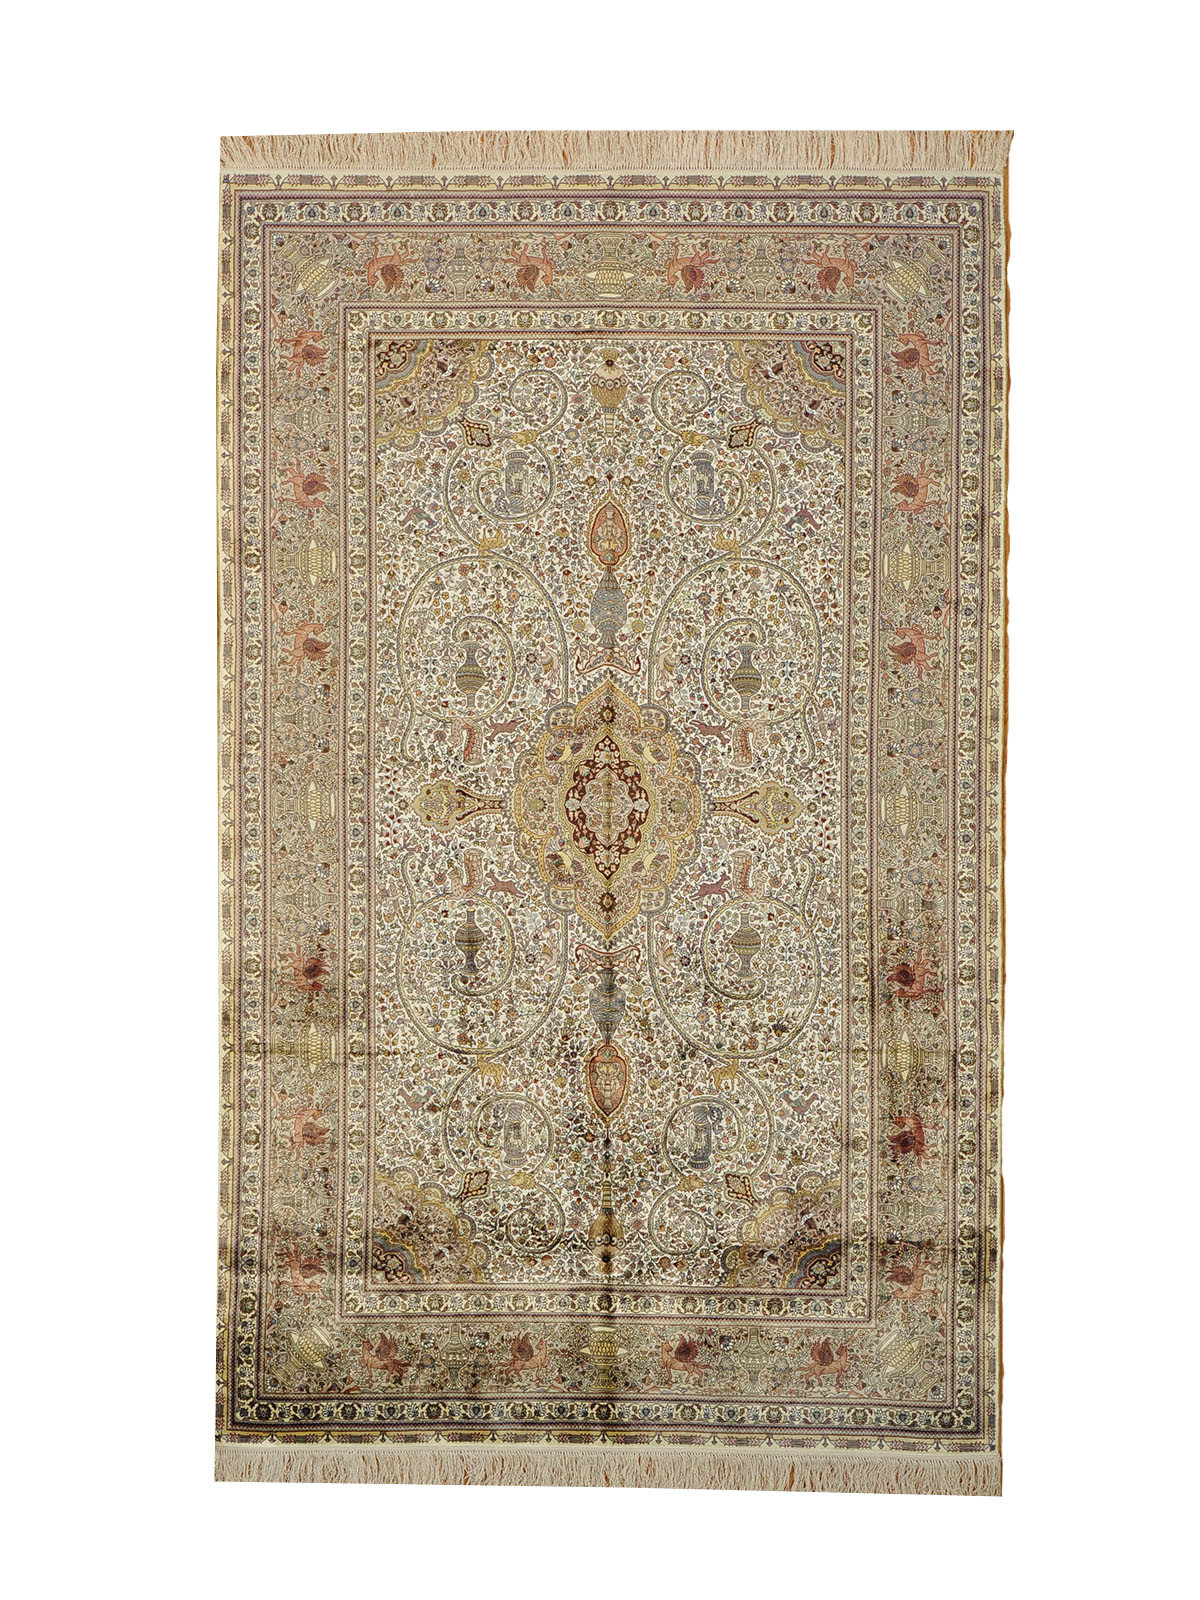 Silk Rugs in the United States